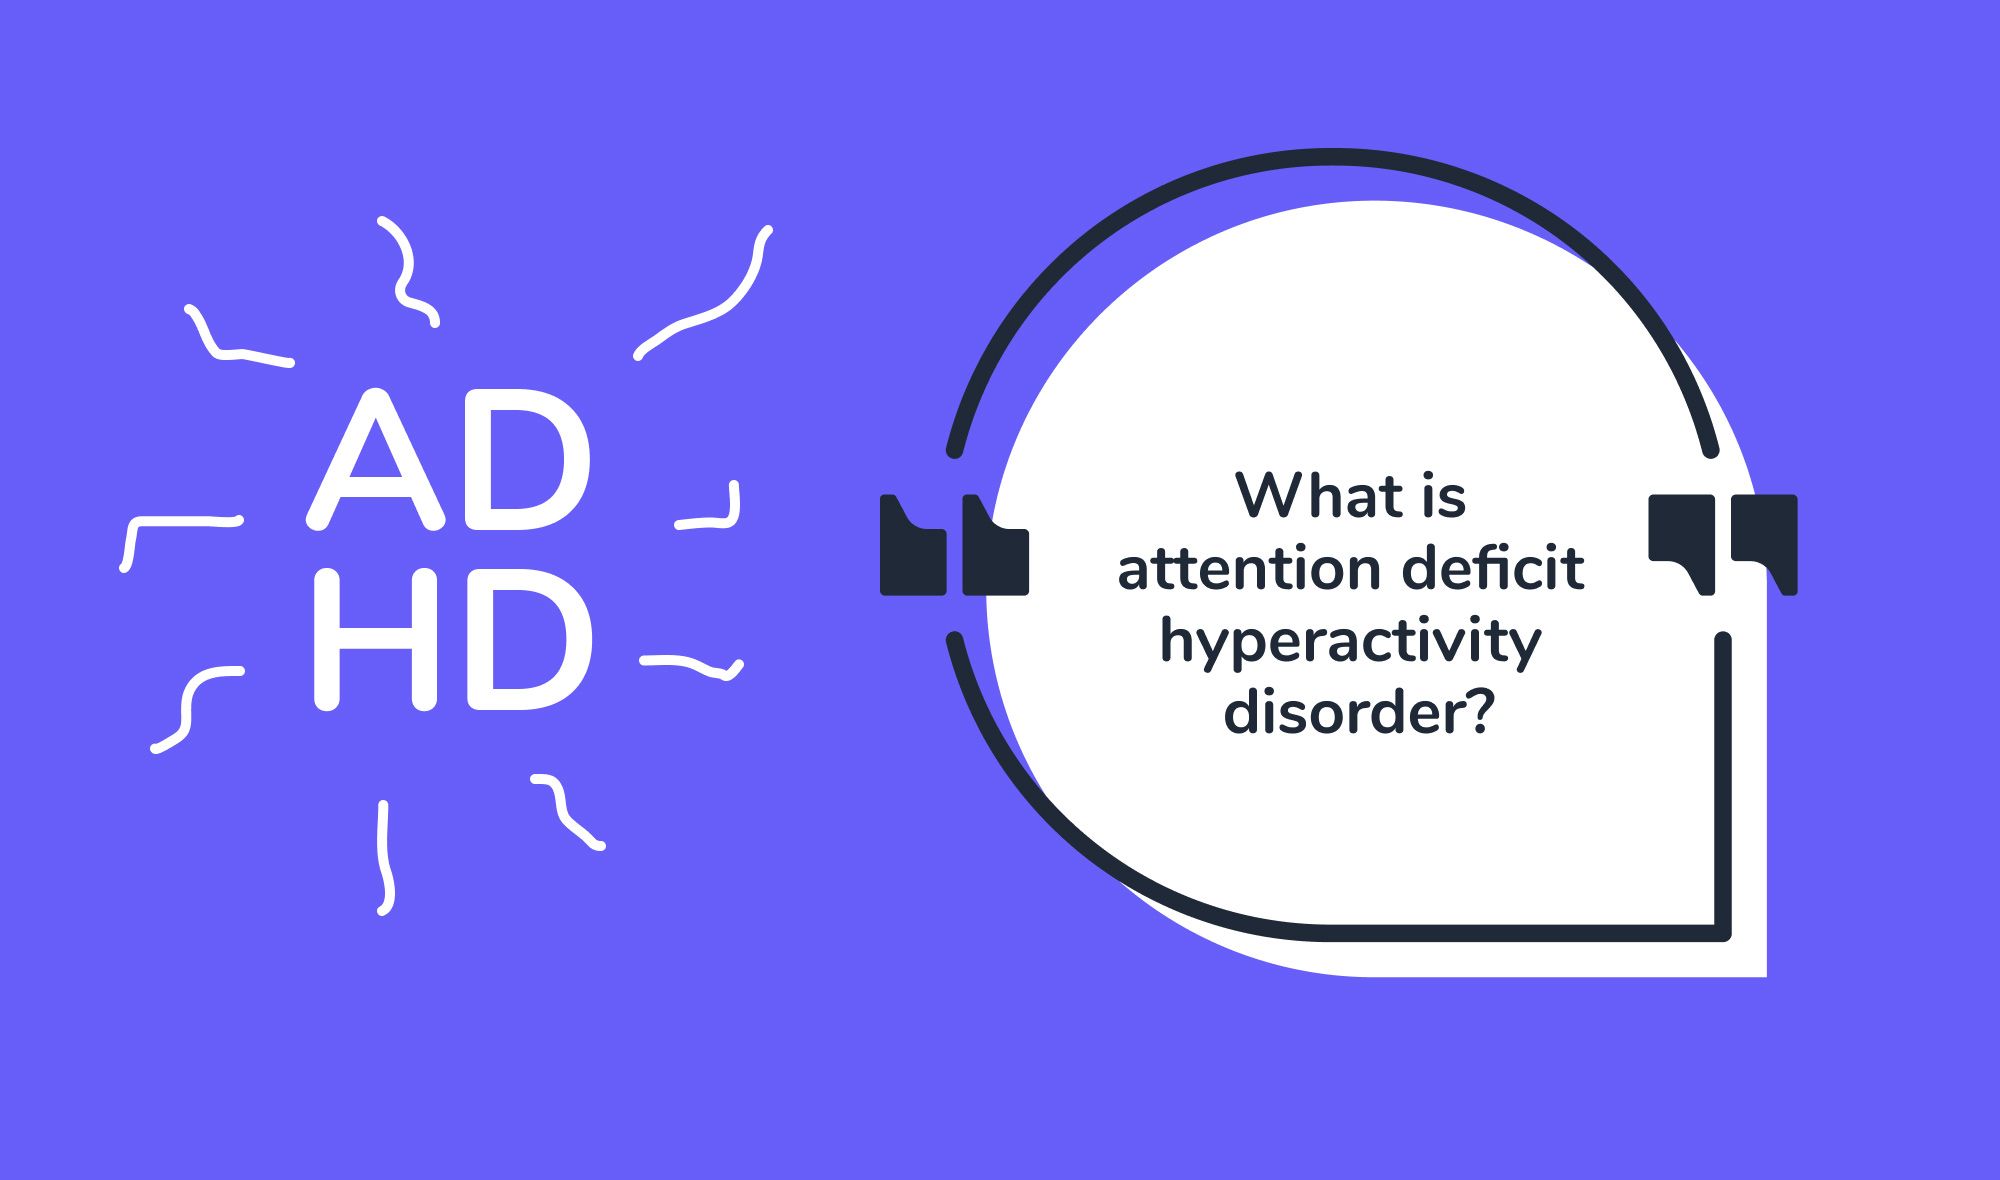 tools for adults with adhd - What is attention deficit hyperactivity disorder?